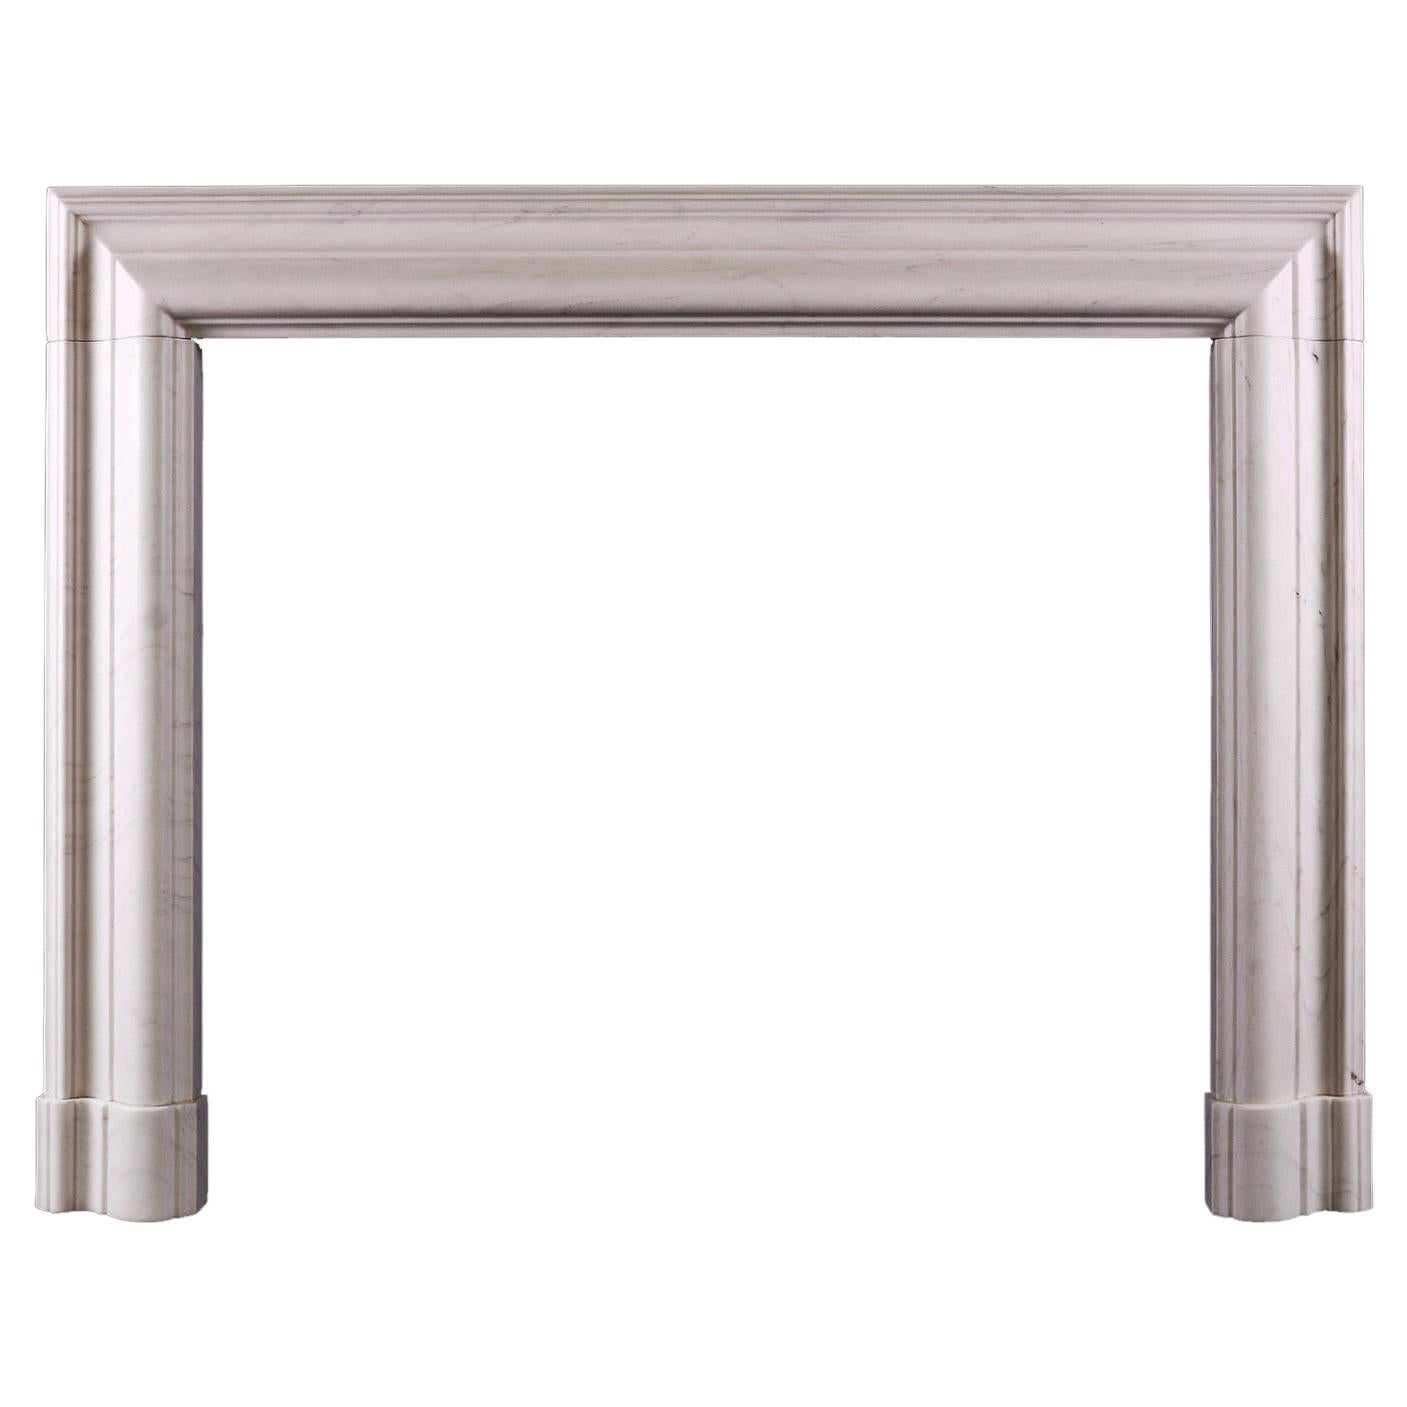 English Moulded Bolection Fireplace in White Marble